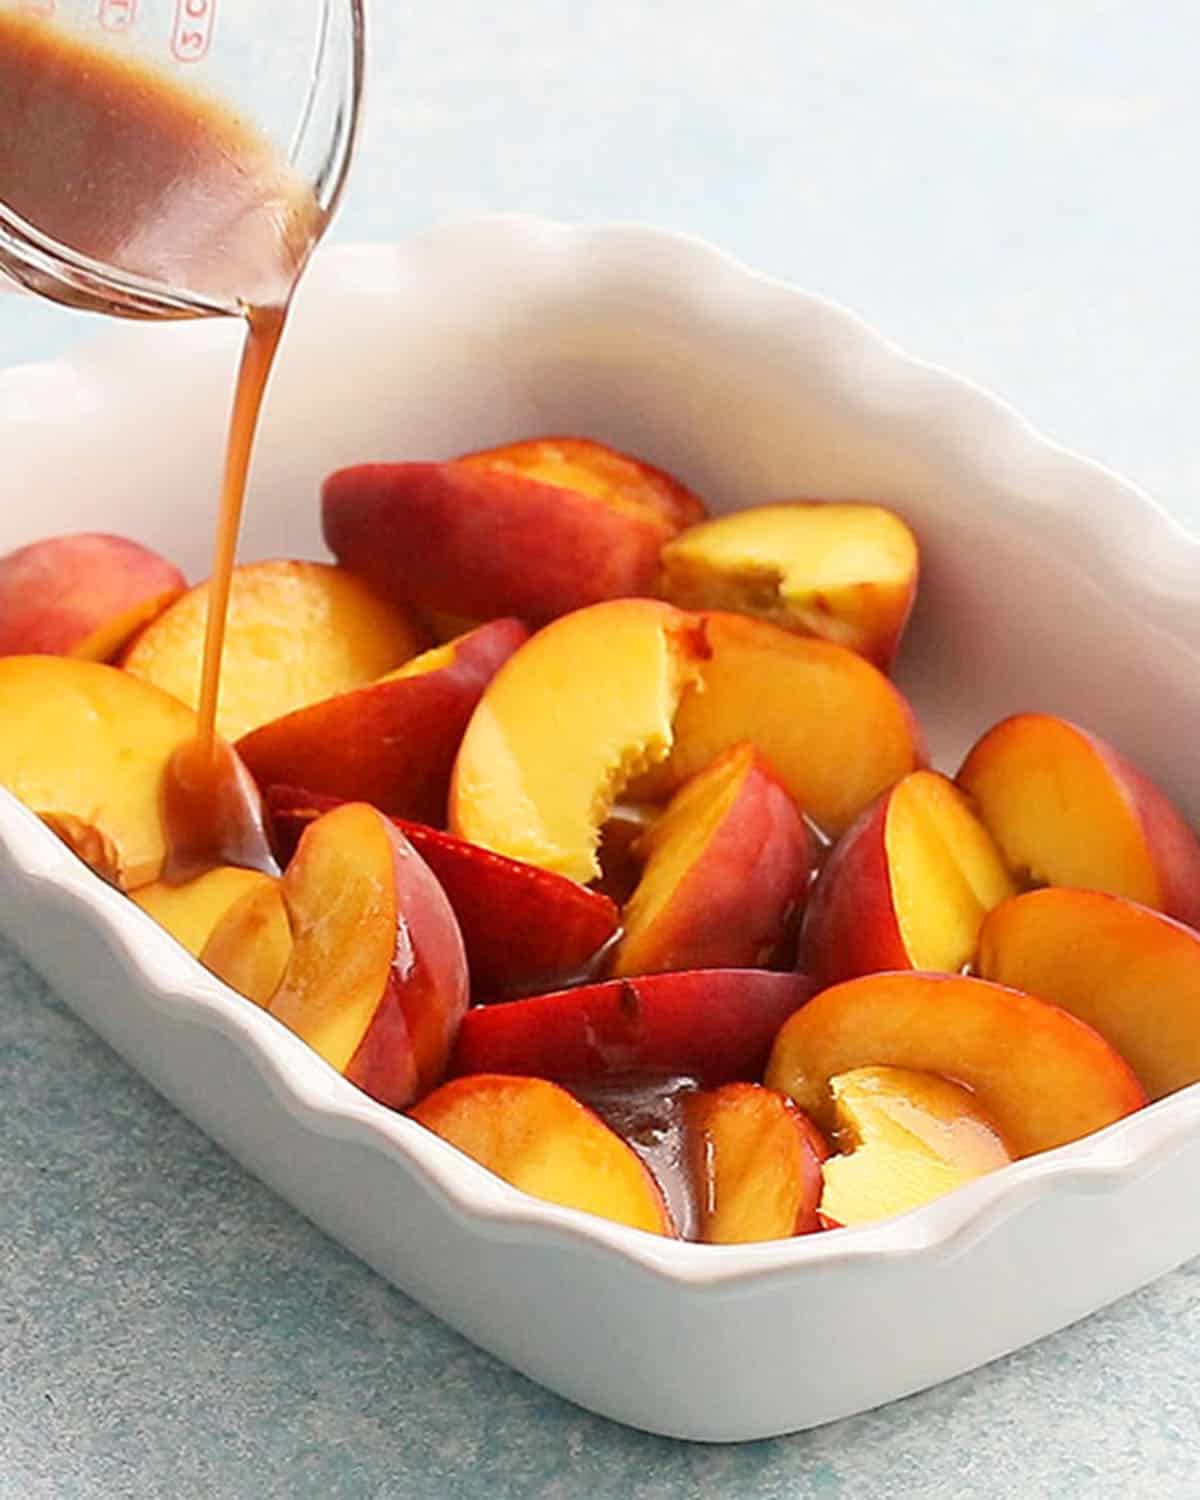 brown liquid being poured into a white baking dish with sliced peaches.